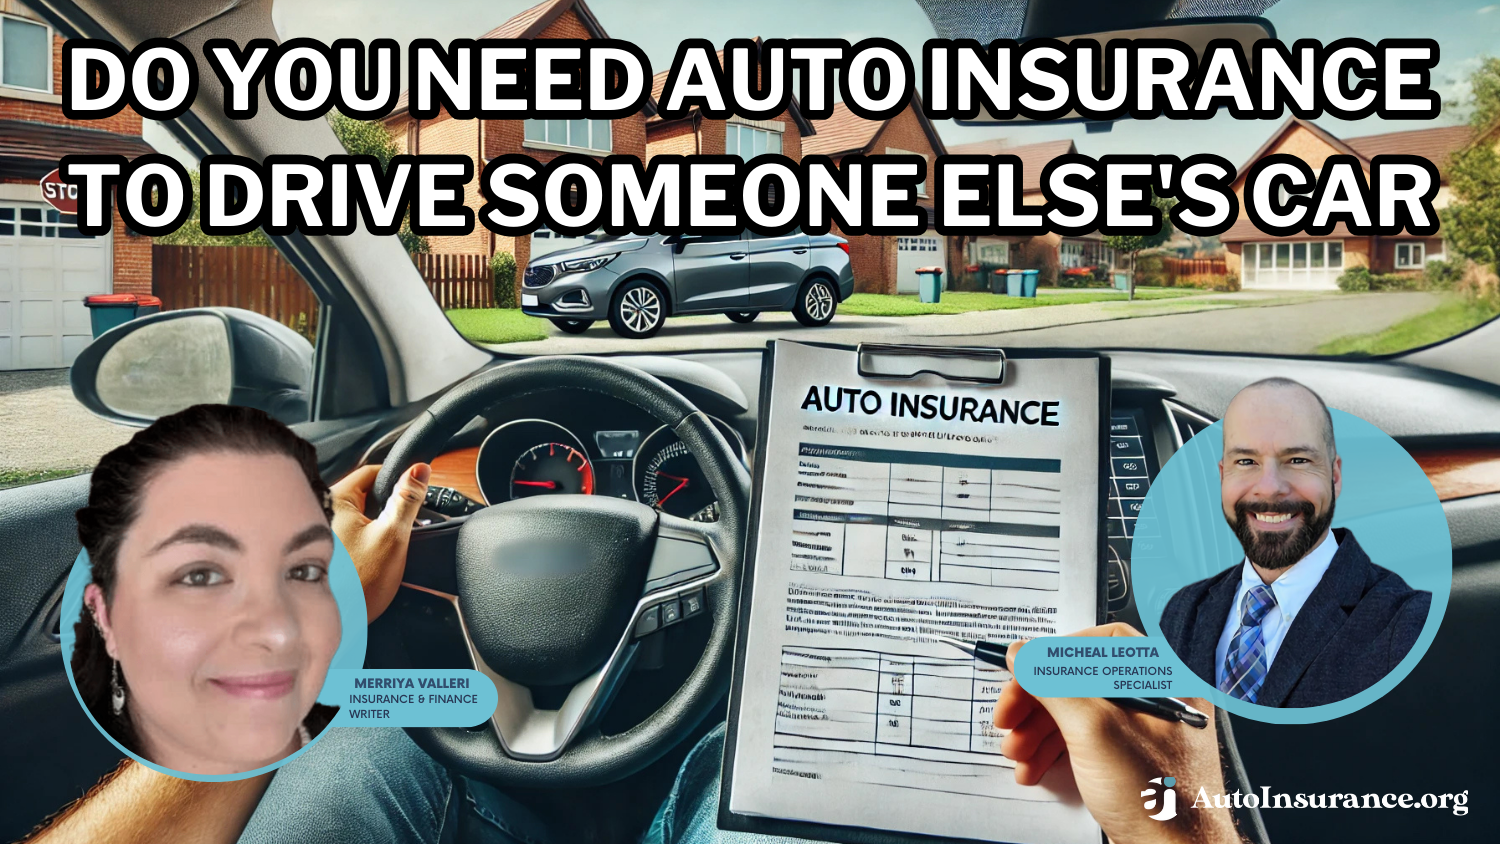 Do you need auto insurance to drive someone else’s car?